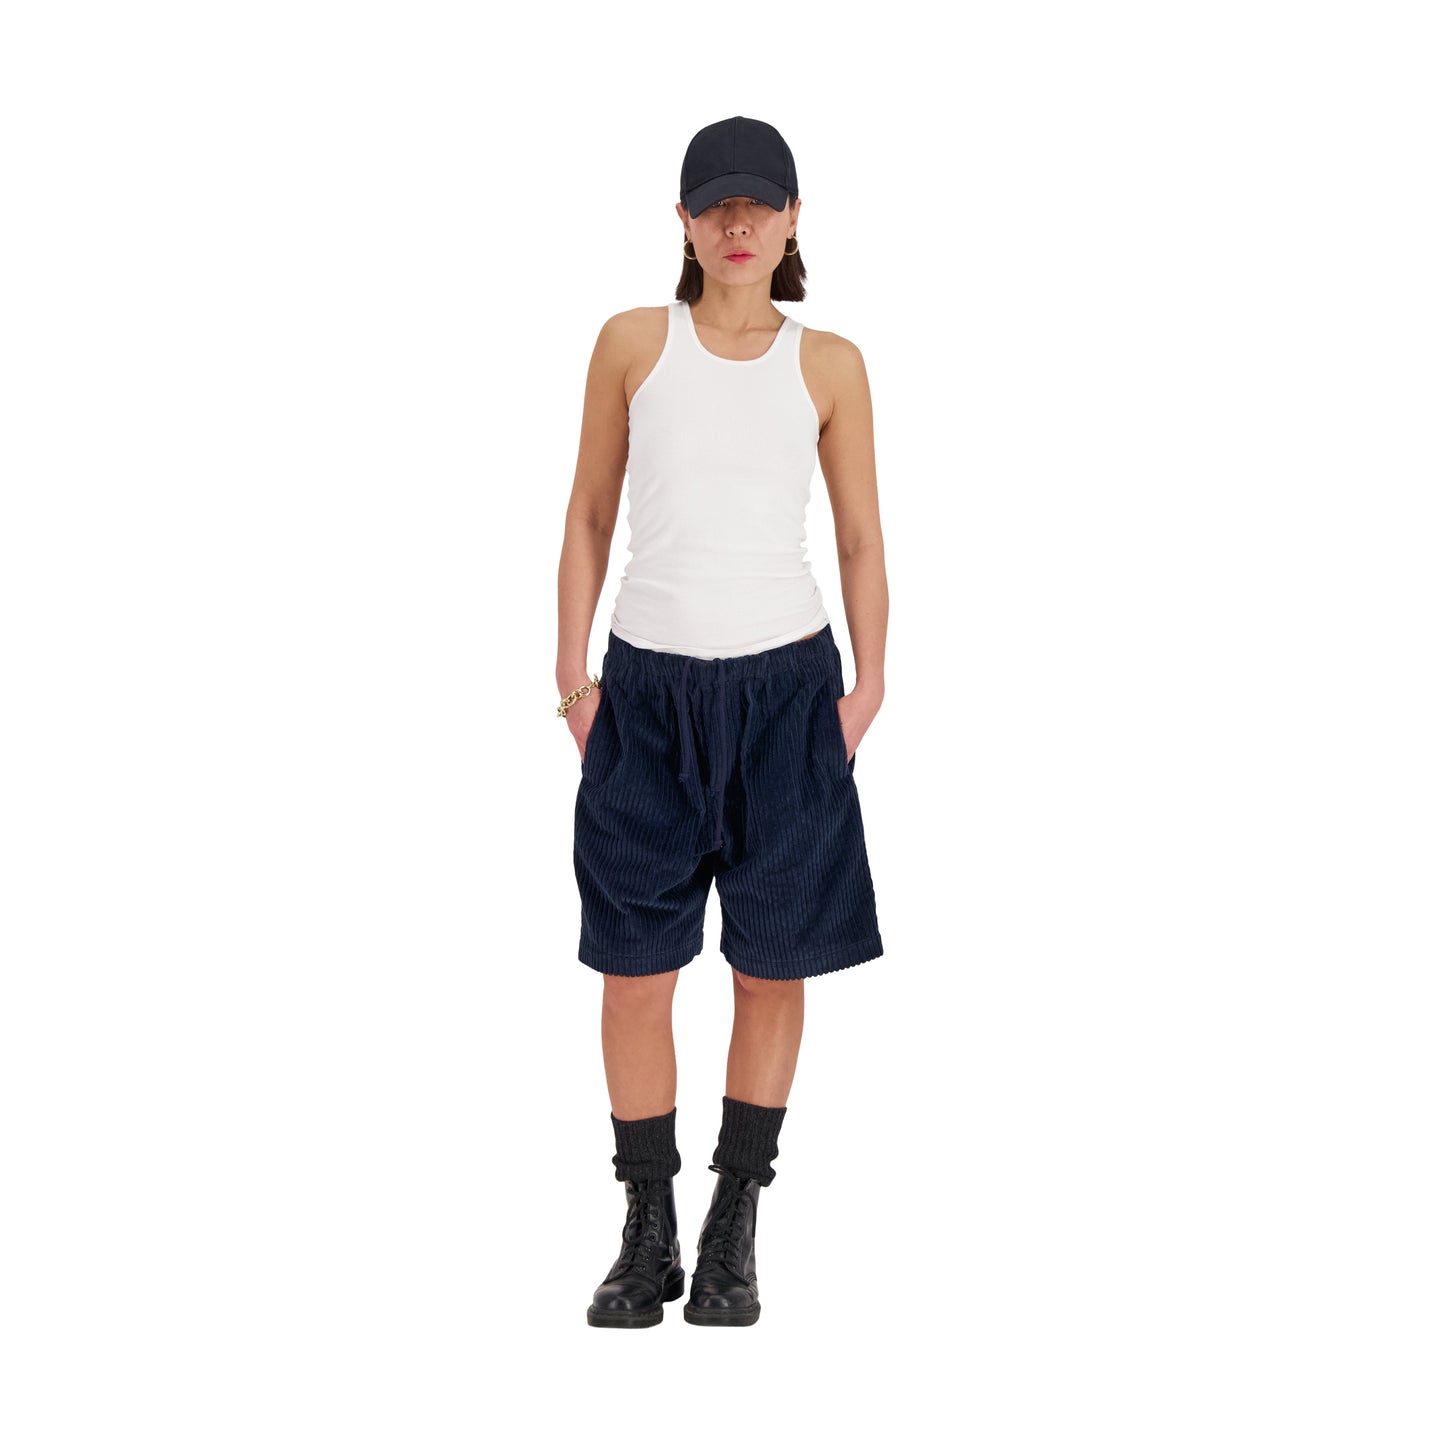 Ed Unlined Exaggerated Cotton Corduroy Drawstring Shorts Midnight Blue